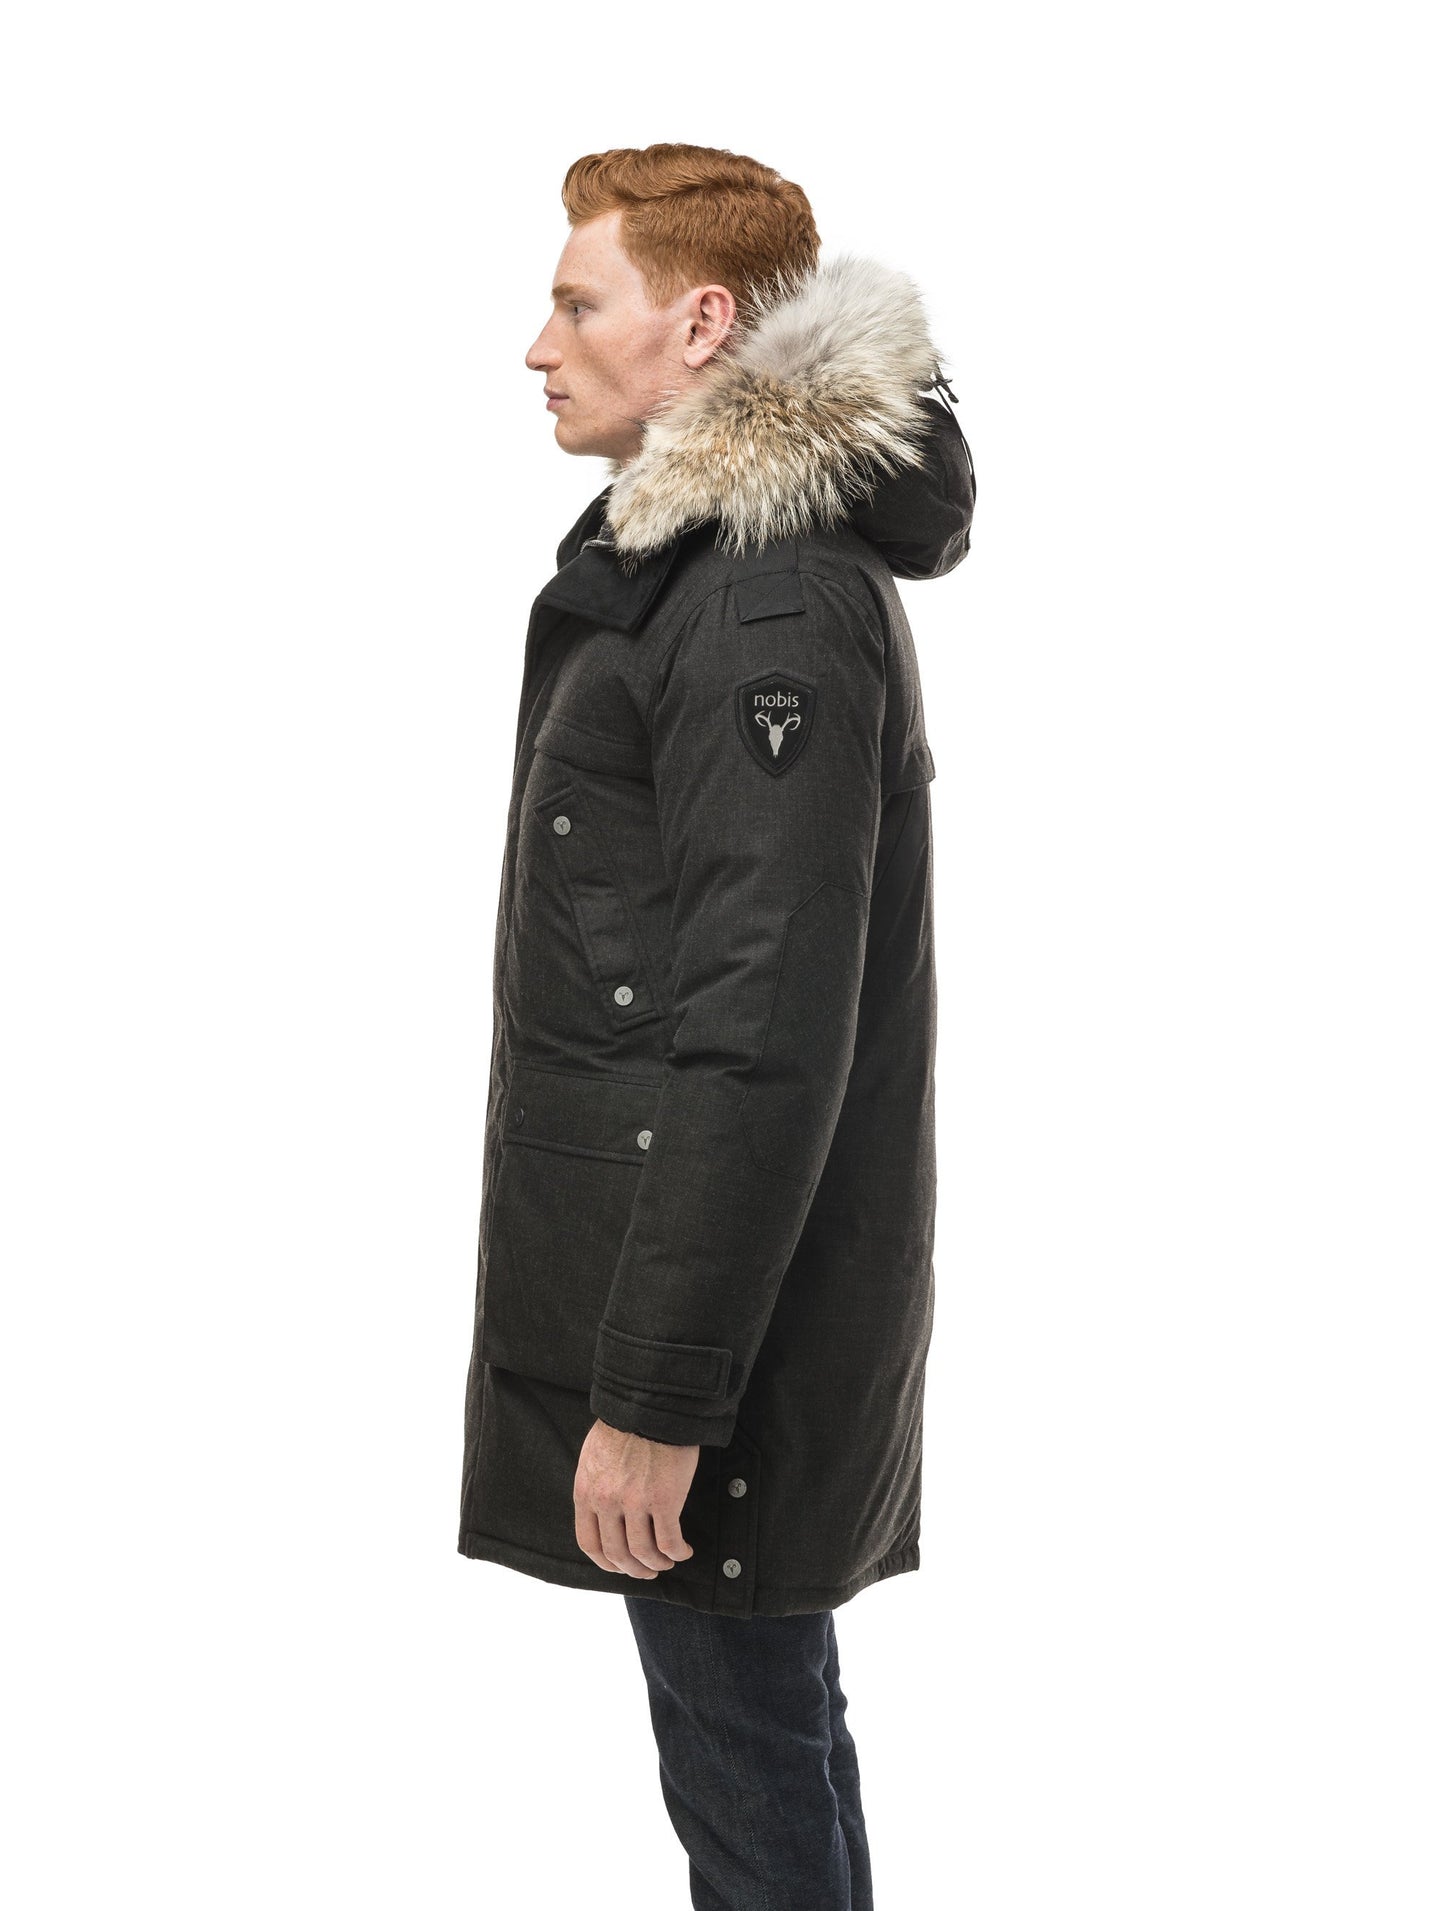 Men's Best Selling Parka the Yatesy is a down filled jacket with a zipper closure and magnetic placket in H. Black